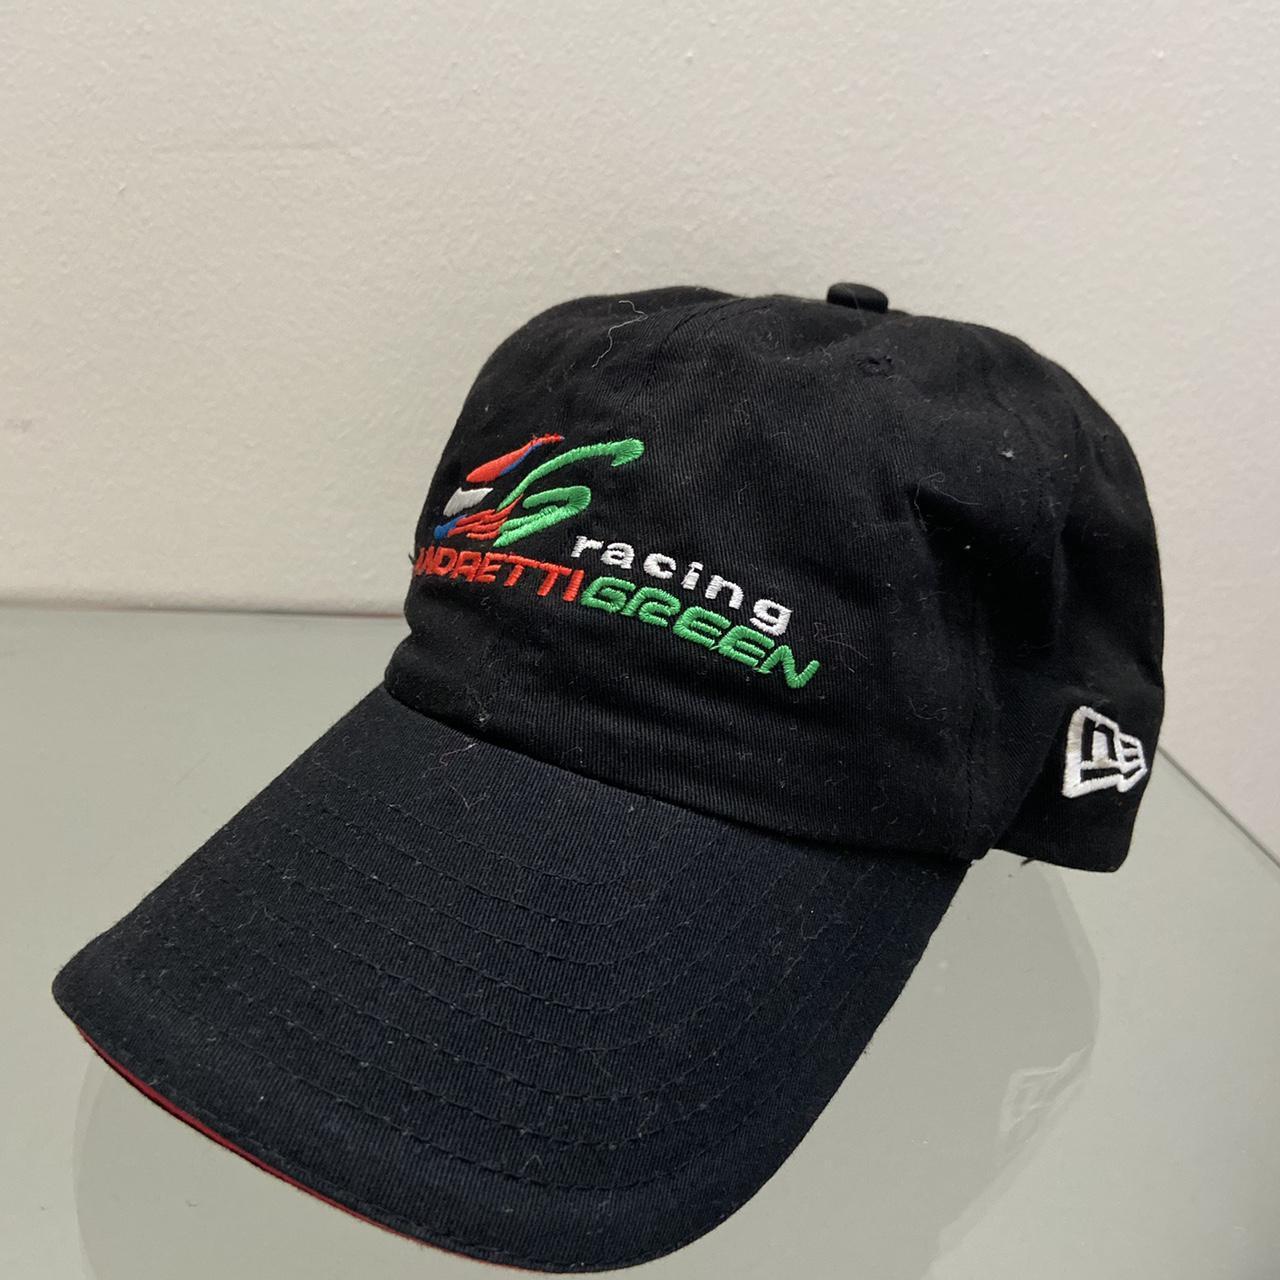 Product Image 1 - Fresh racing hat from Honda